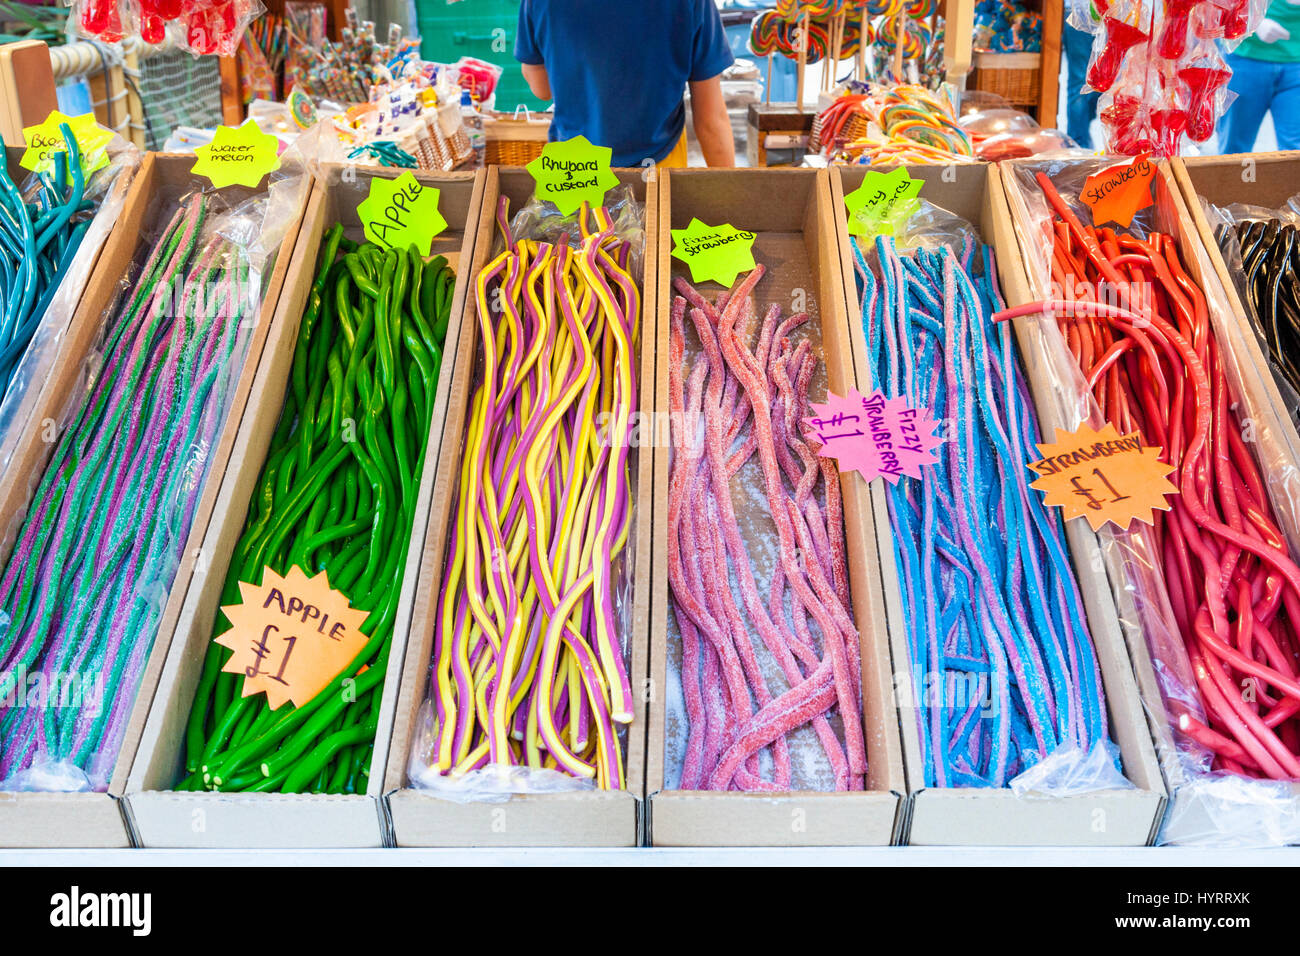 Liquorice strings at a pick n mix sweet stall, England, UK Stock Photo